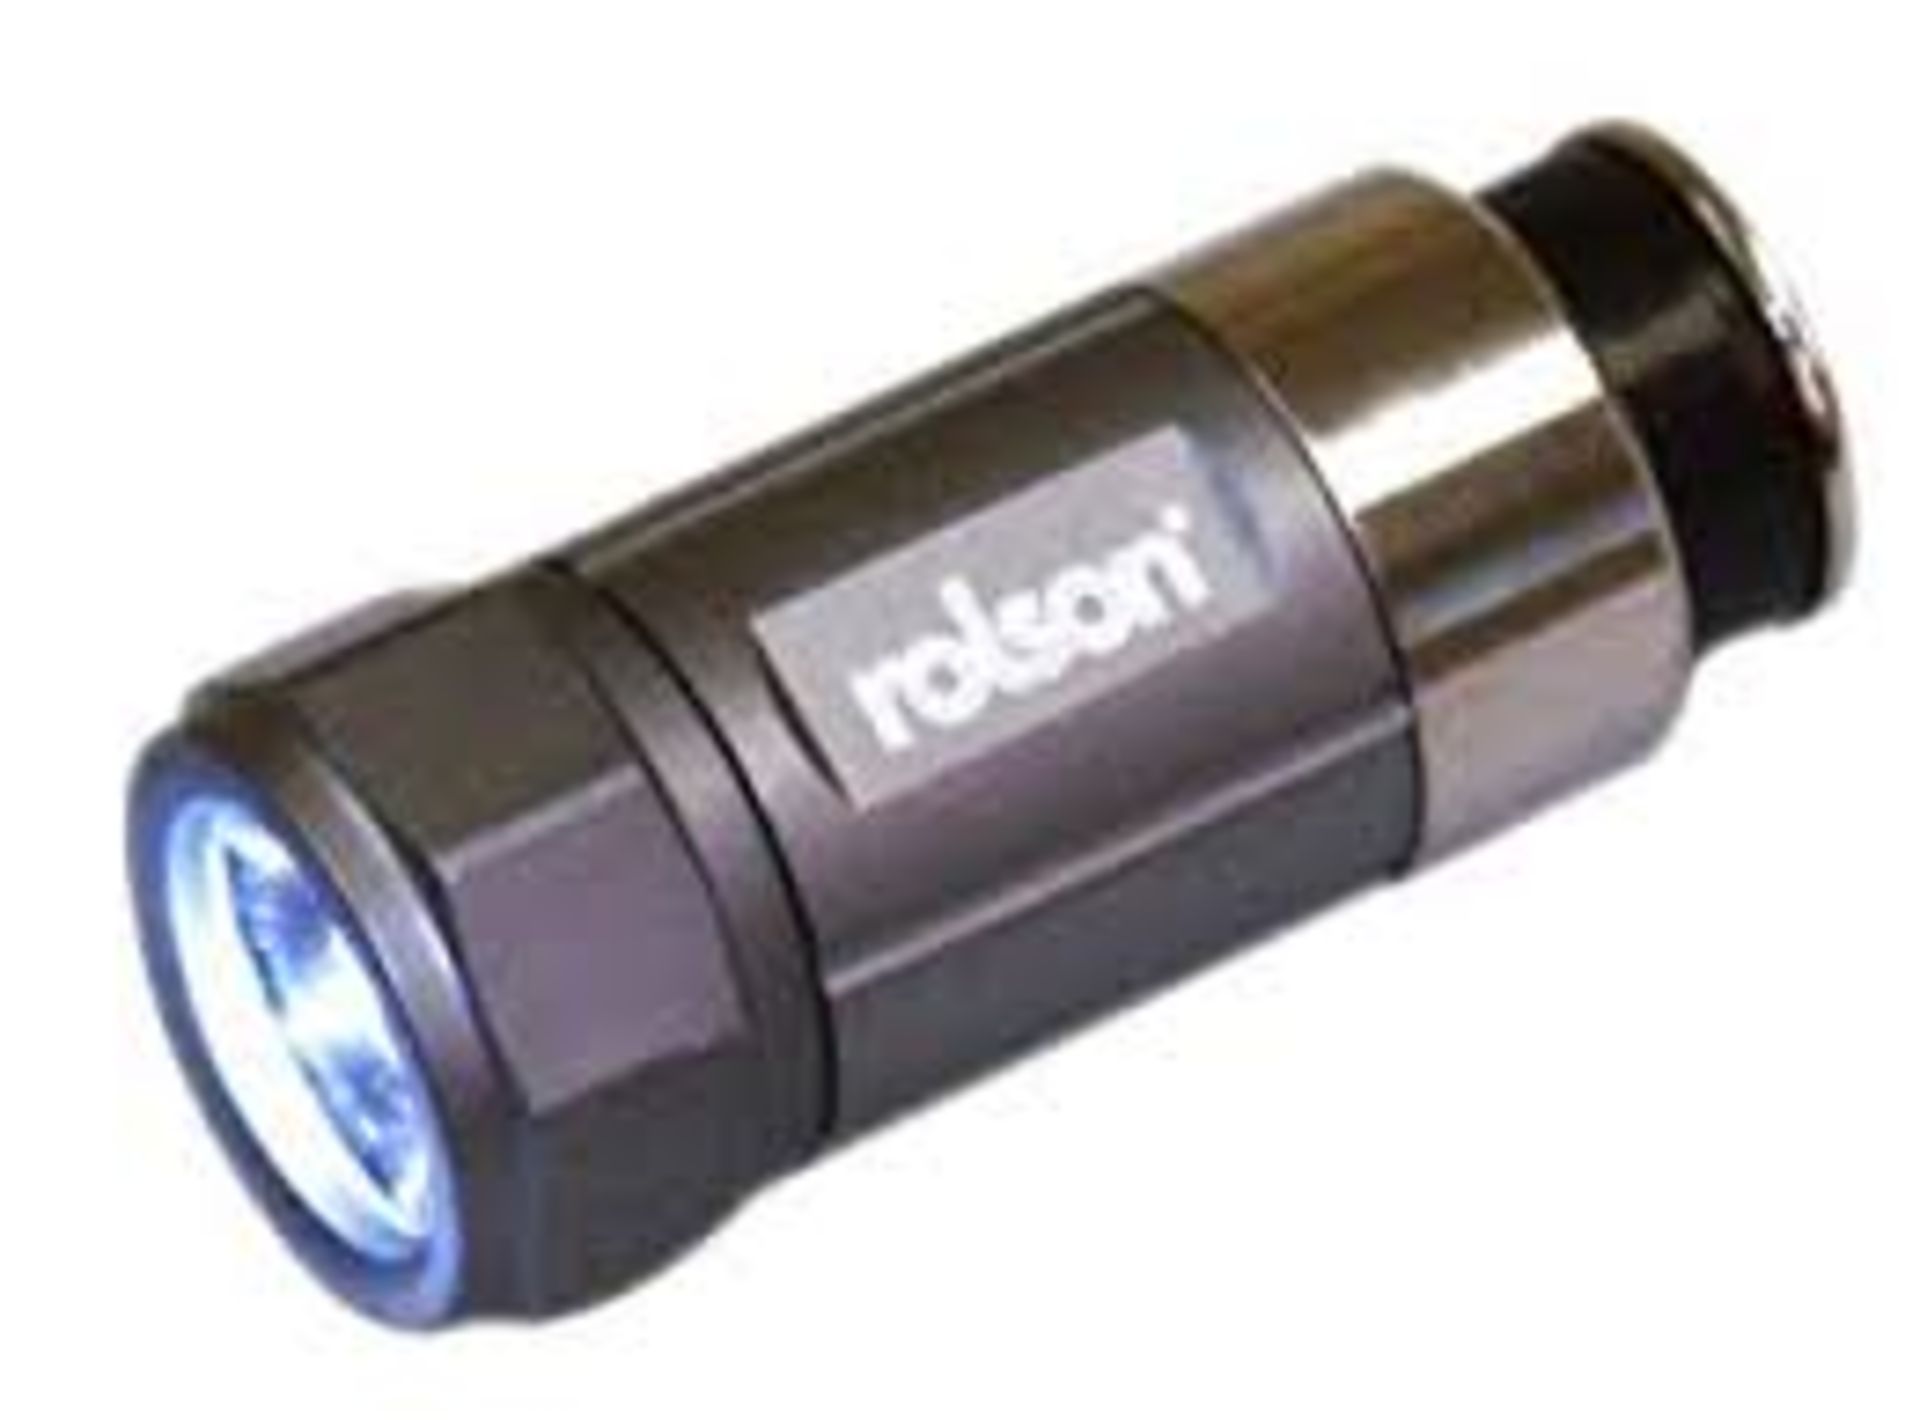 Retail Display box of 9 Rolson LED Rechargeable 12V lights, brand new and Blister packed, Says a